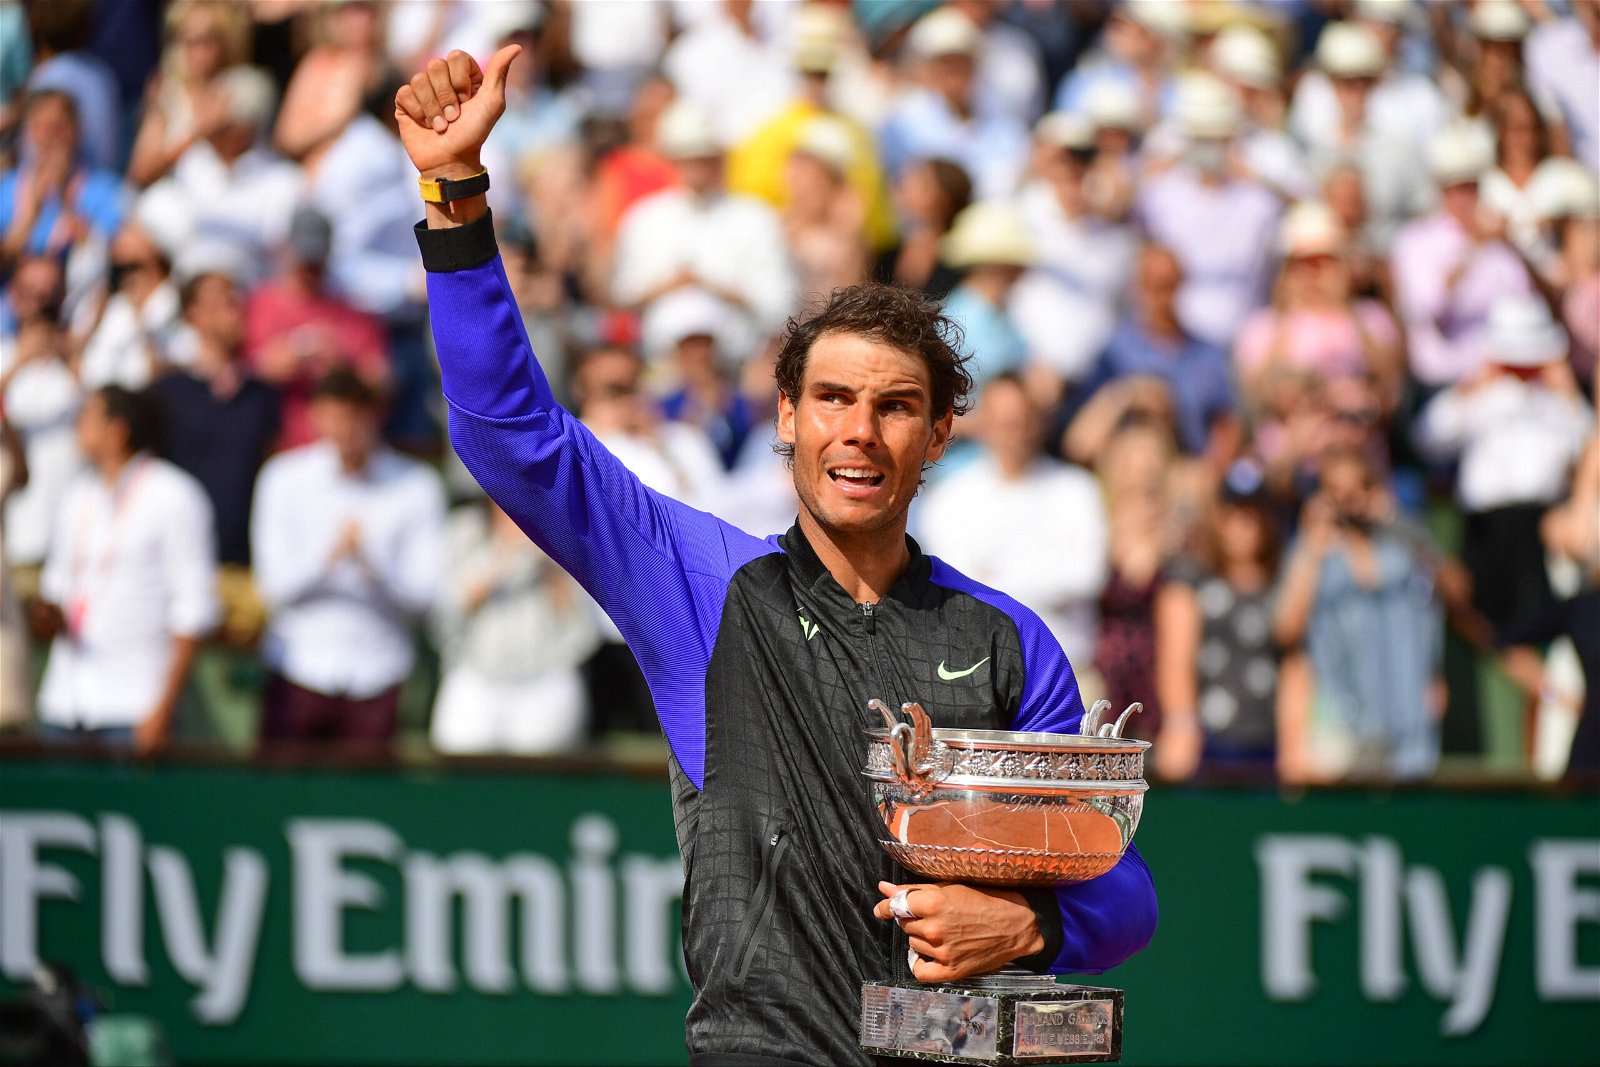 How many times has Rafael Nadal won French Open? 14 titles!